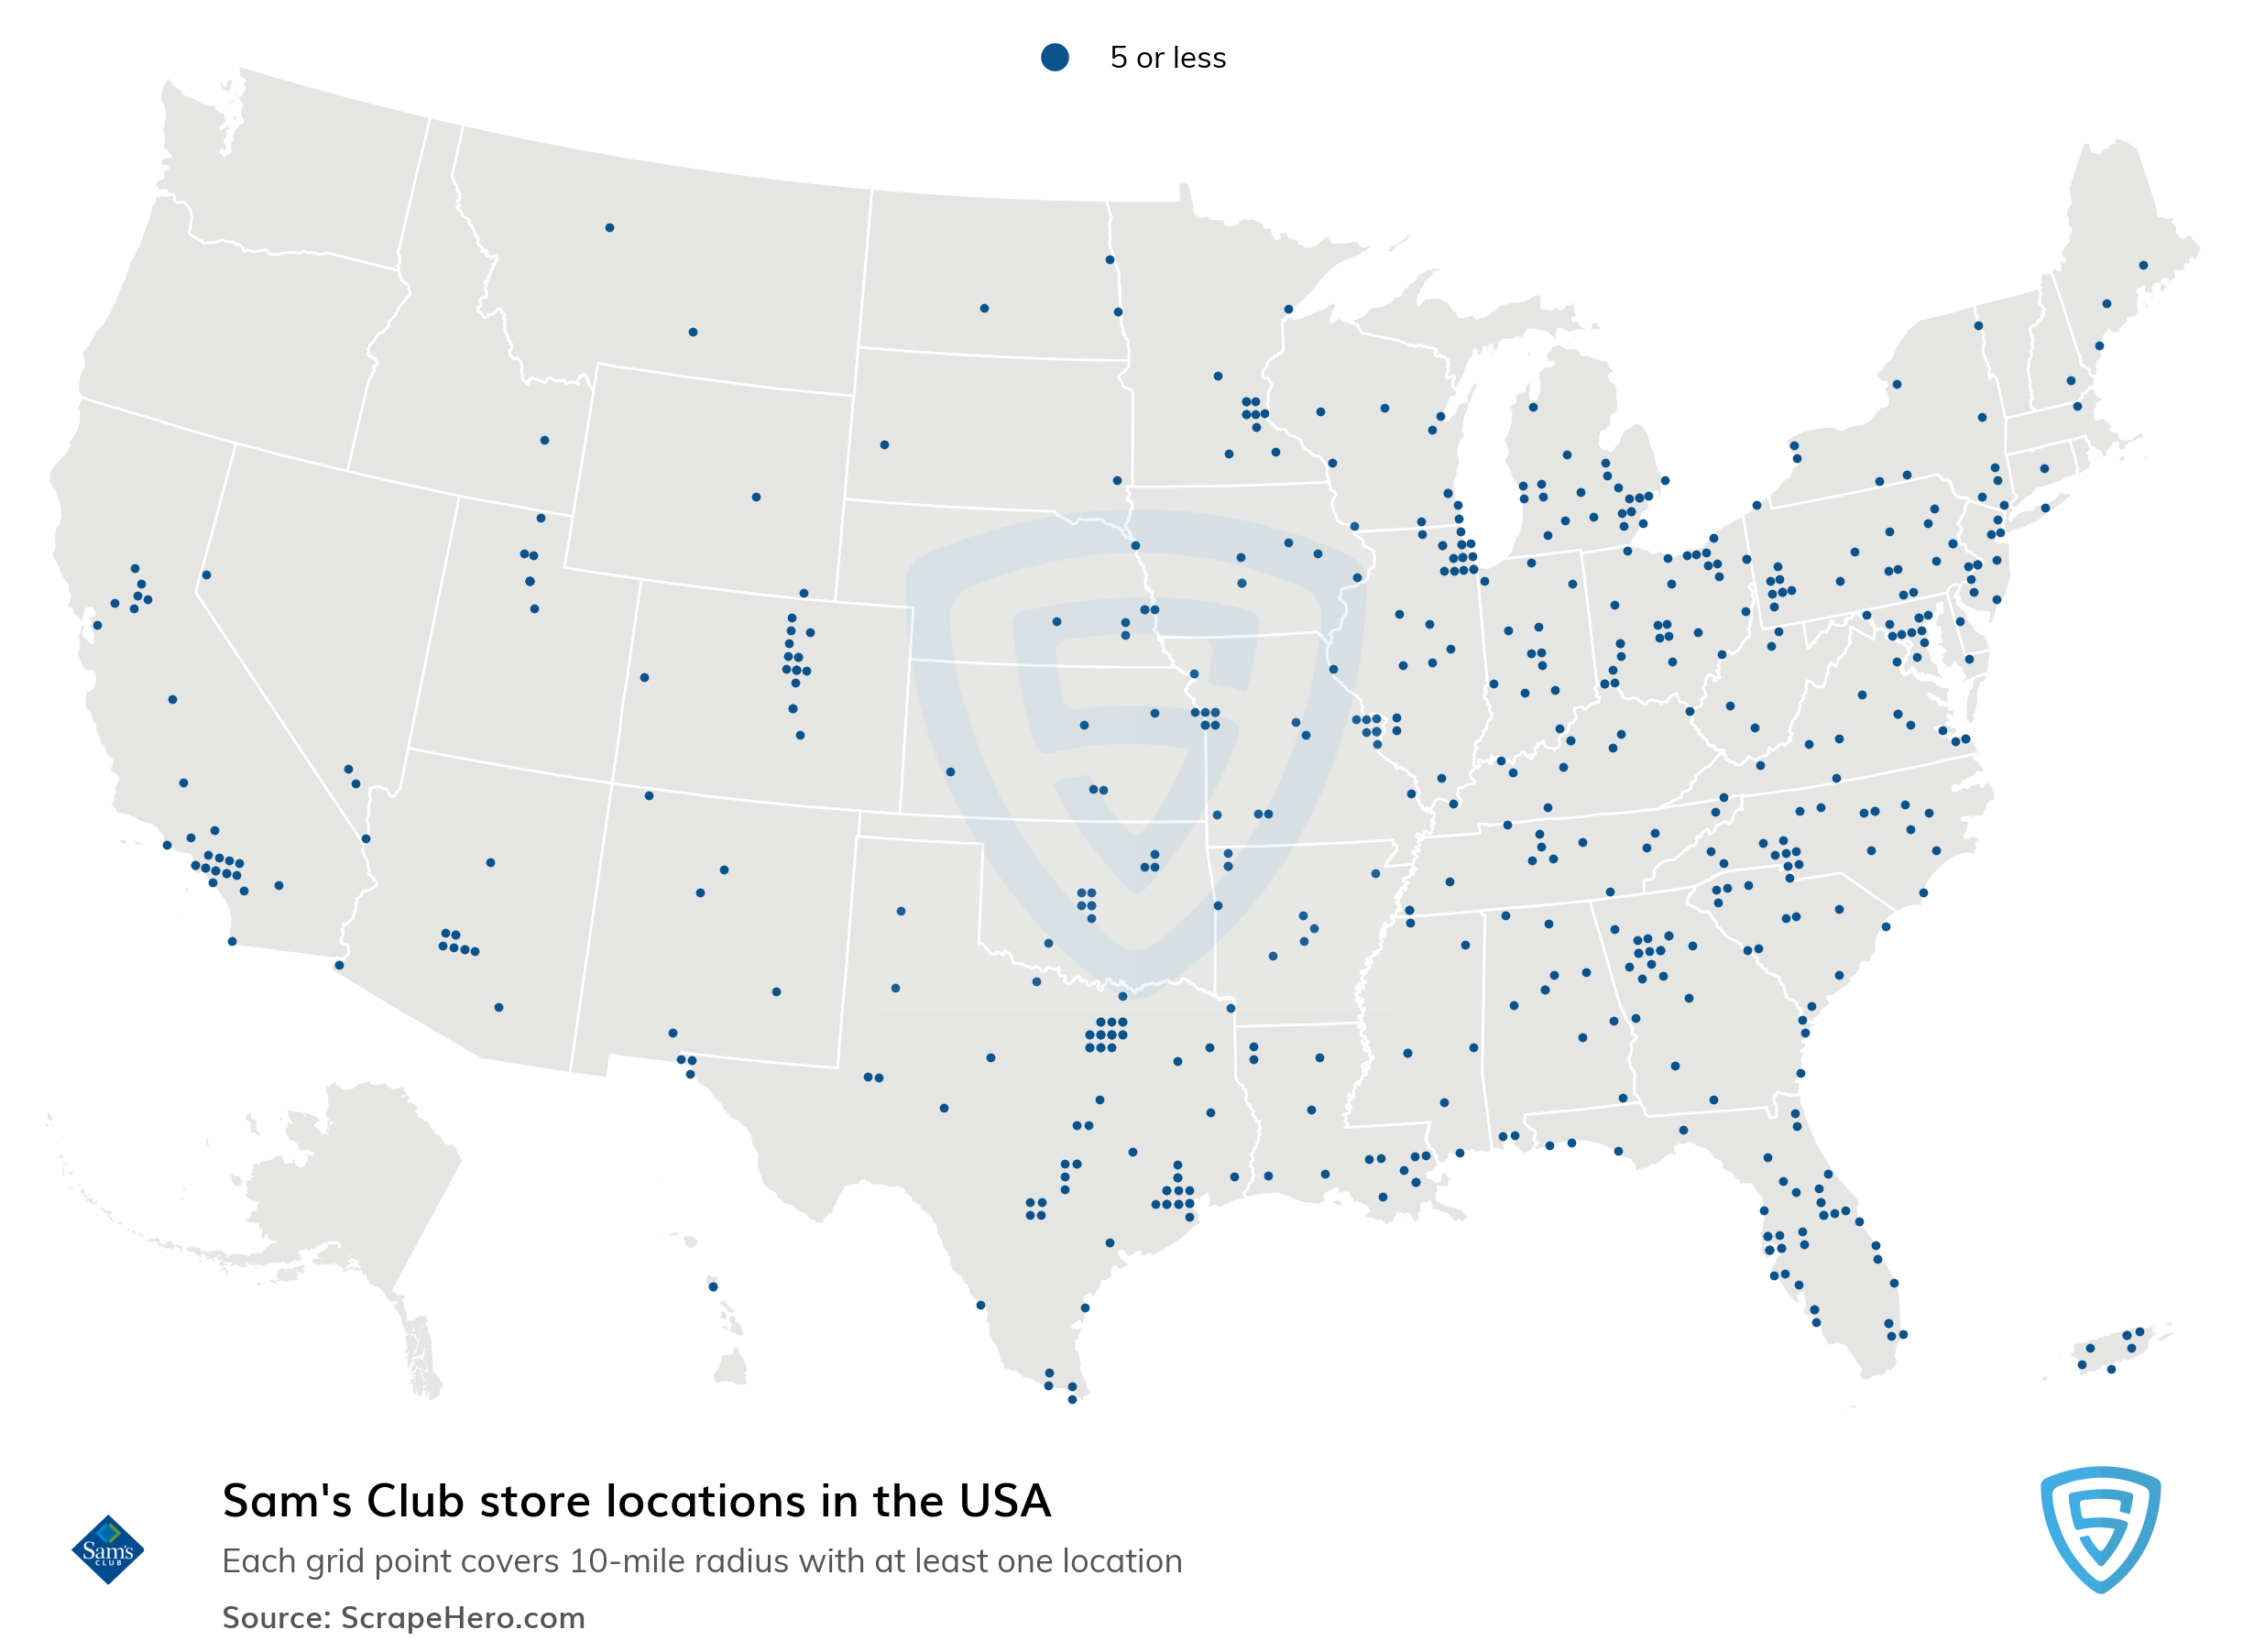 Number of Sam's Club locations in the USA in 2023 | ScrapeHero